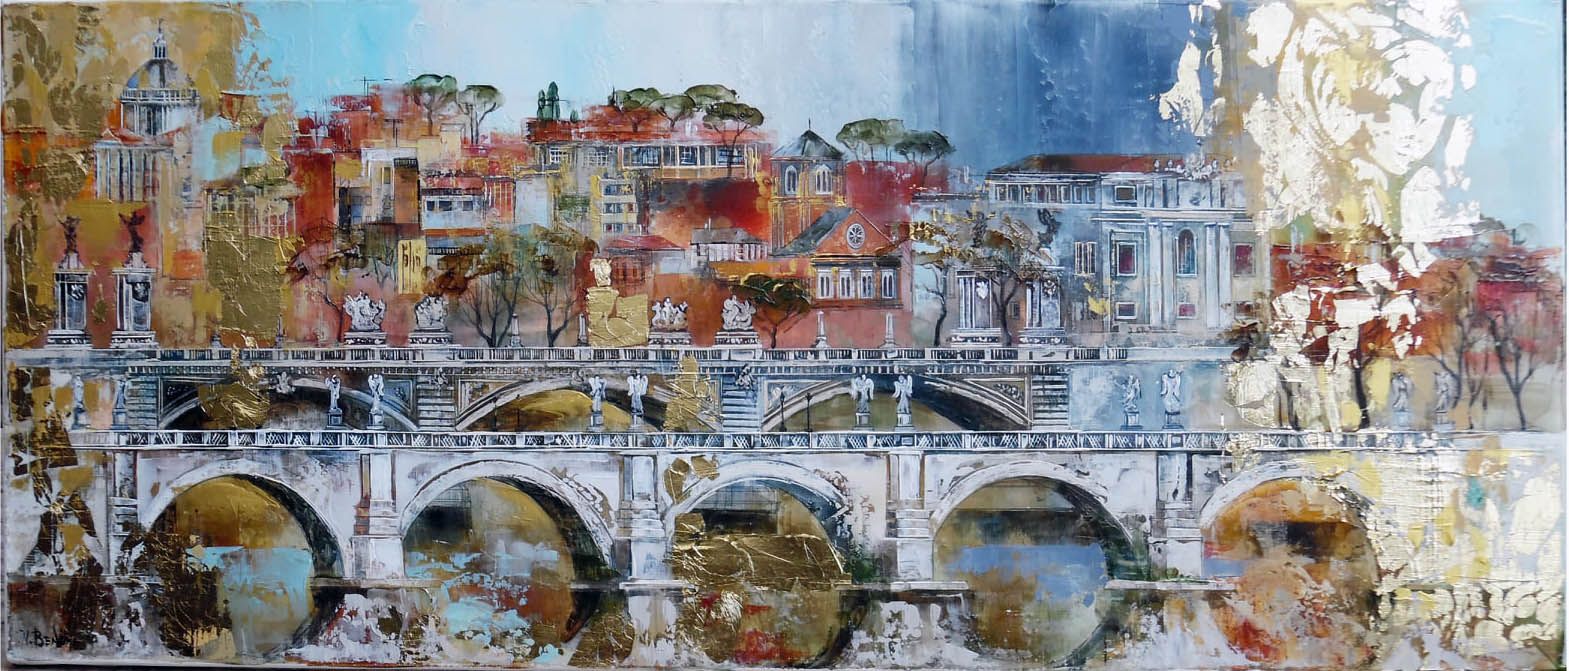 ancient bridge, modern painting, Florence in the painting, decorative painting, gold leaf painting, urban landscape, ancient city, water image.